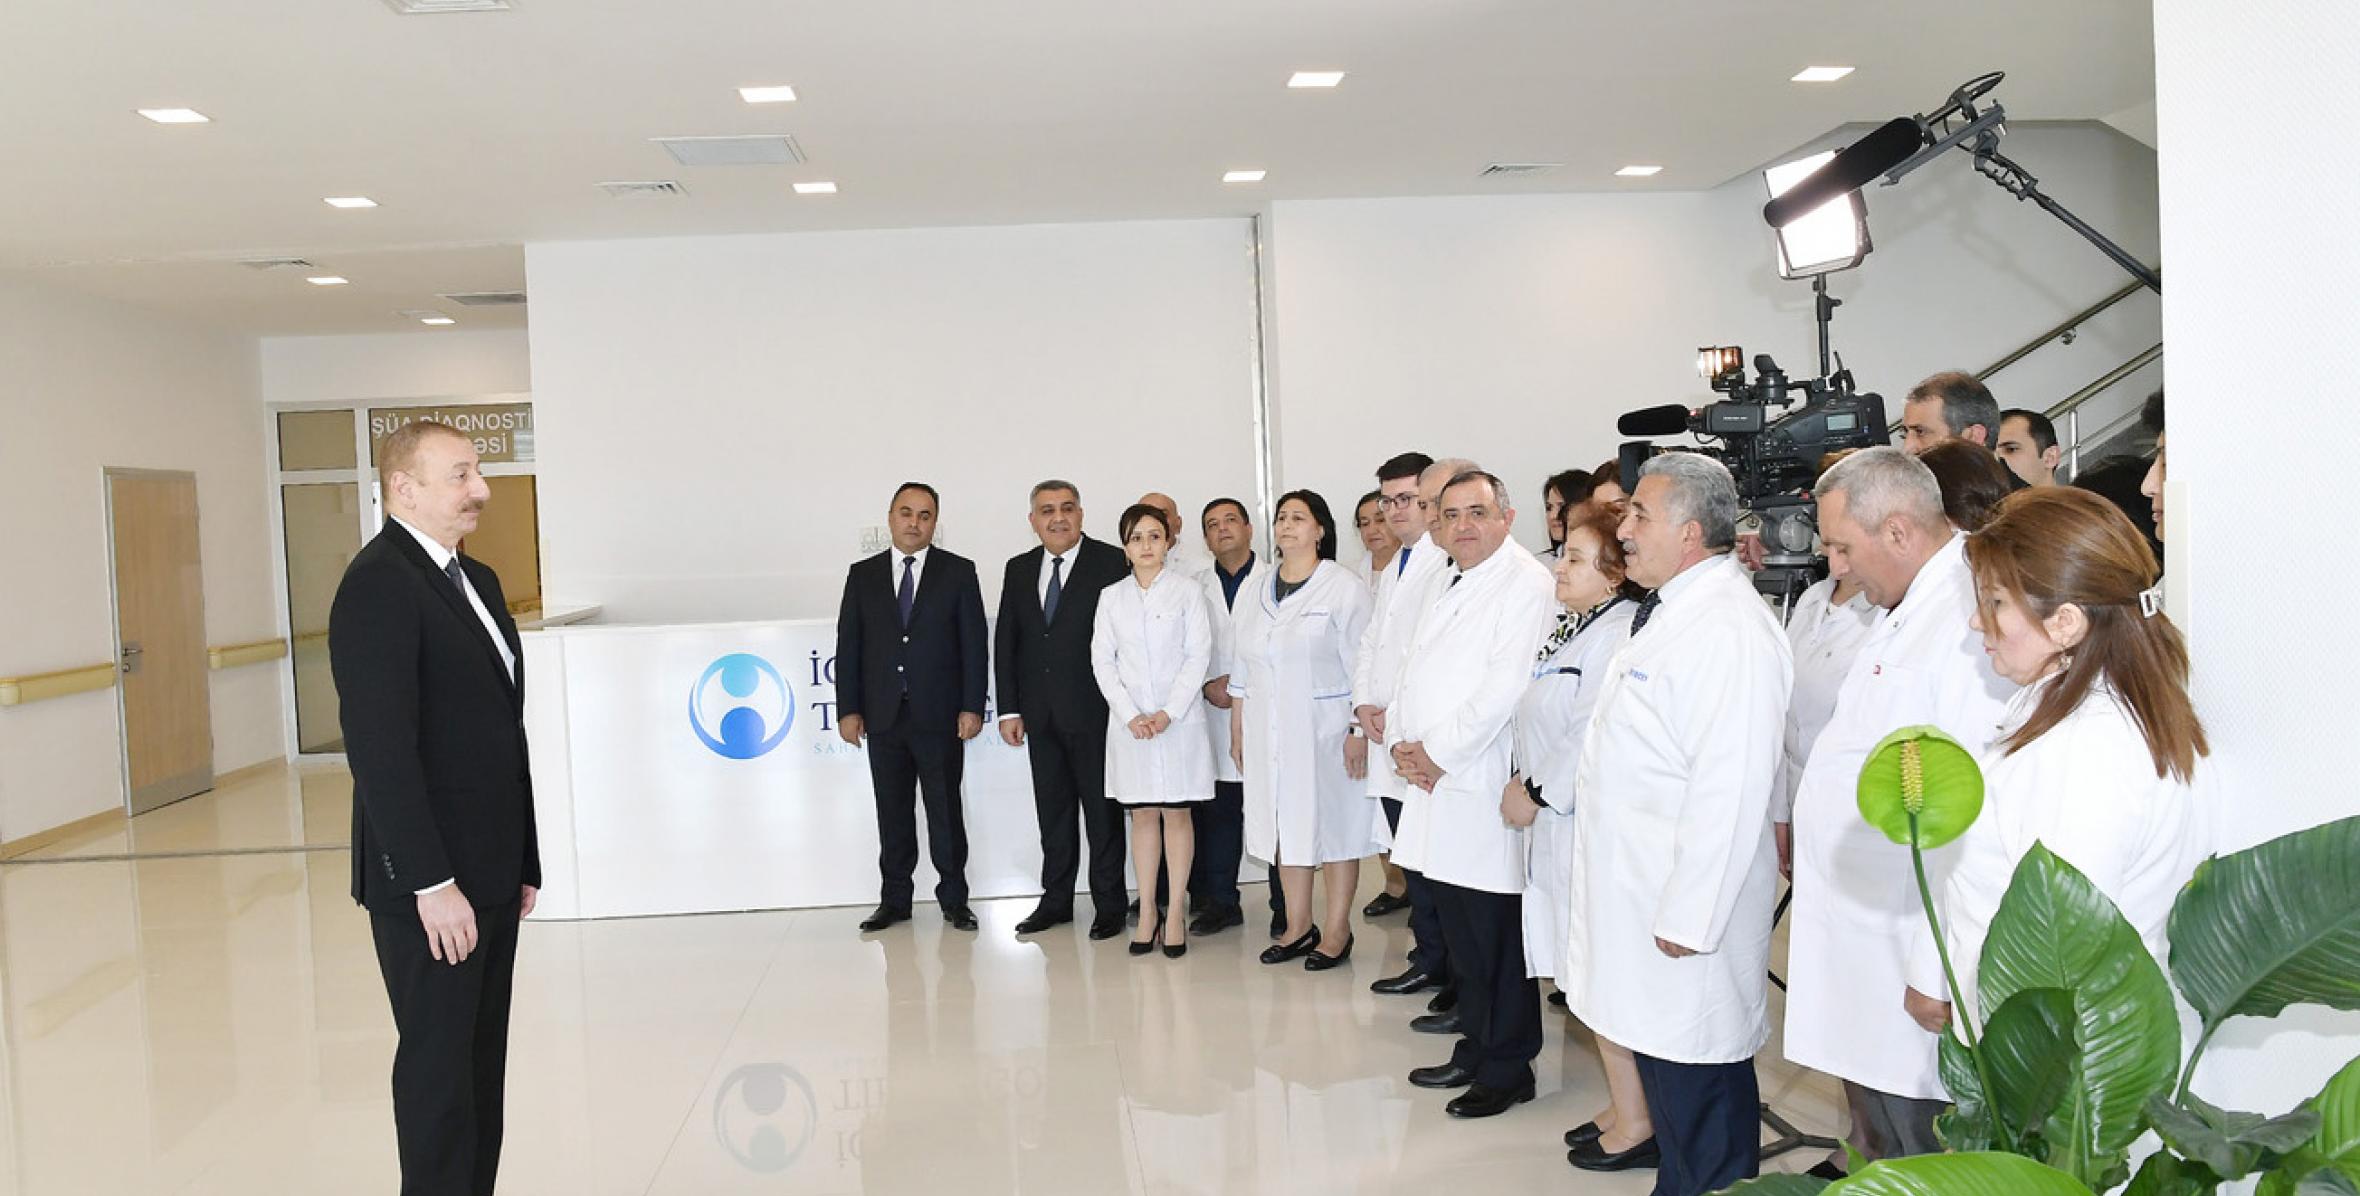 Speech by Ilham Aliyev at the opening of Goranboy District Central Hospital